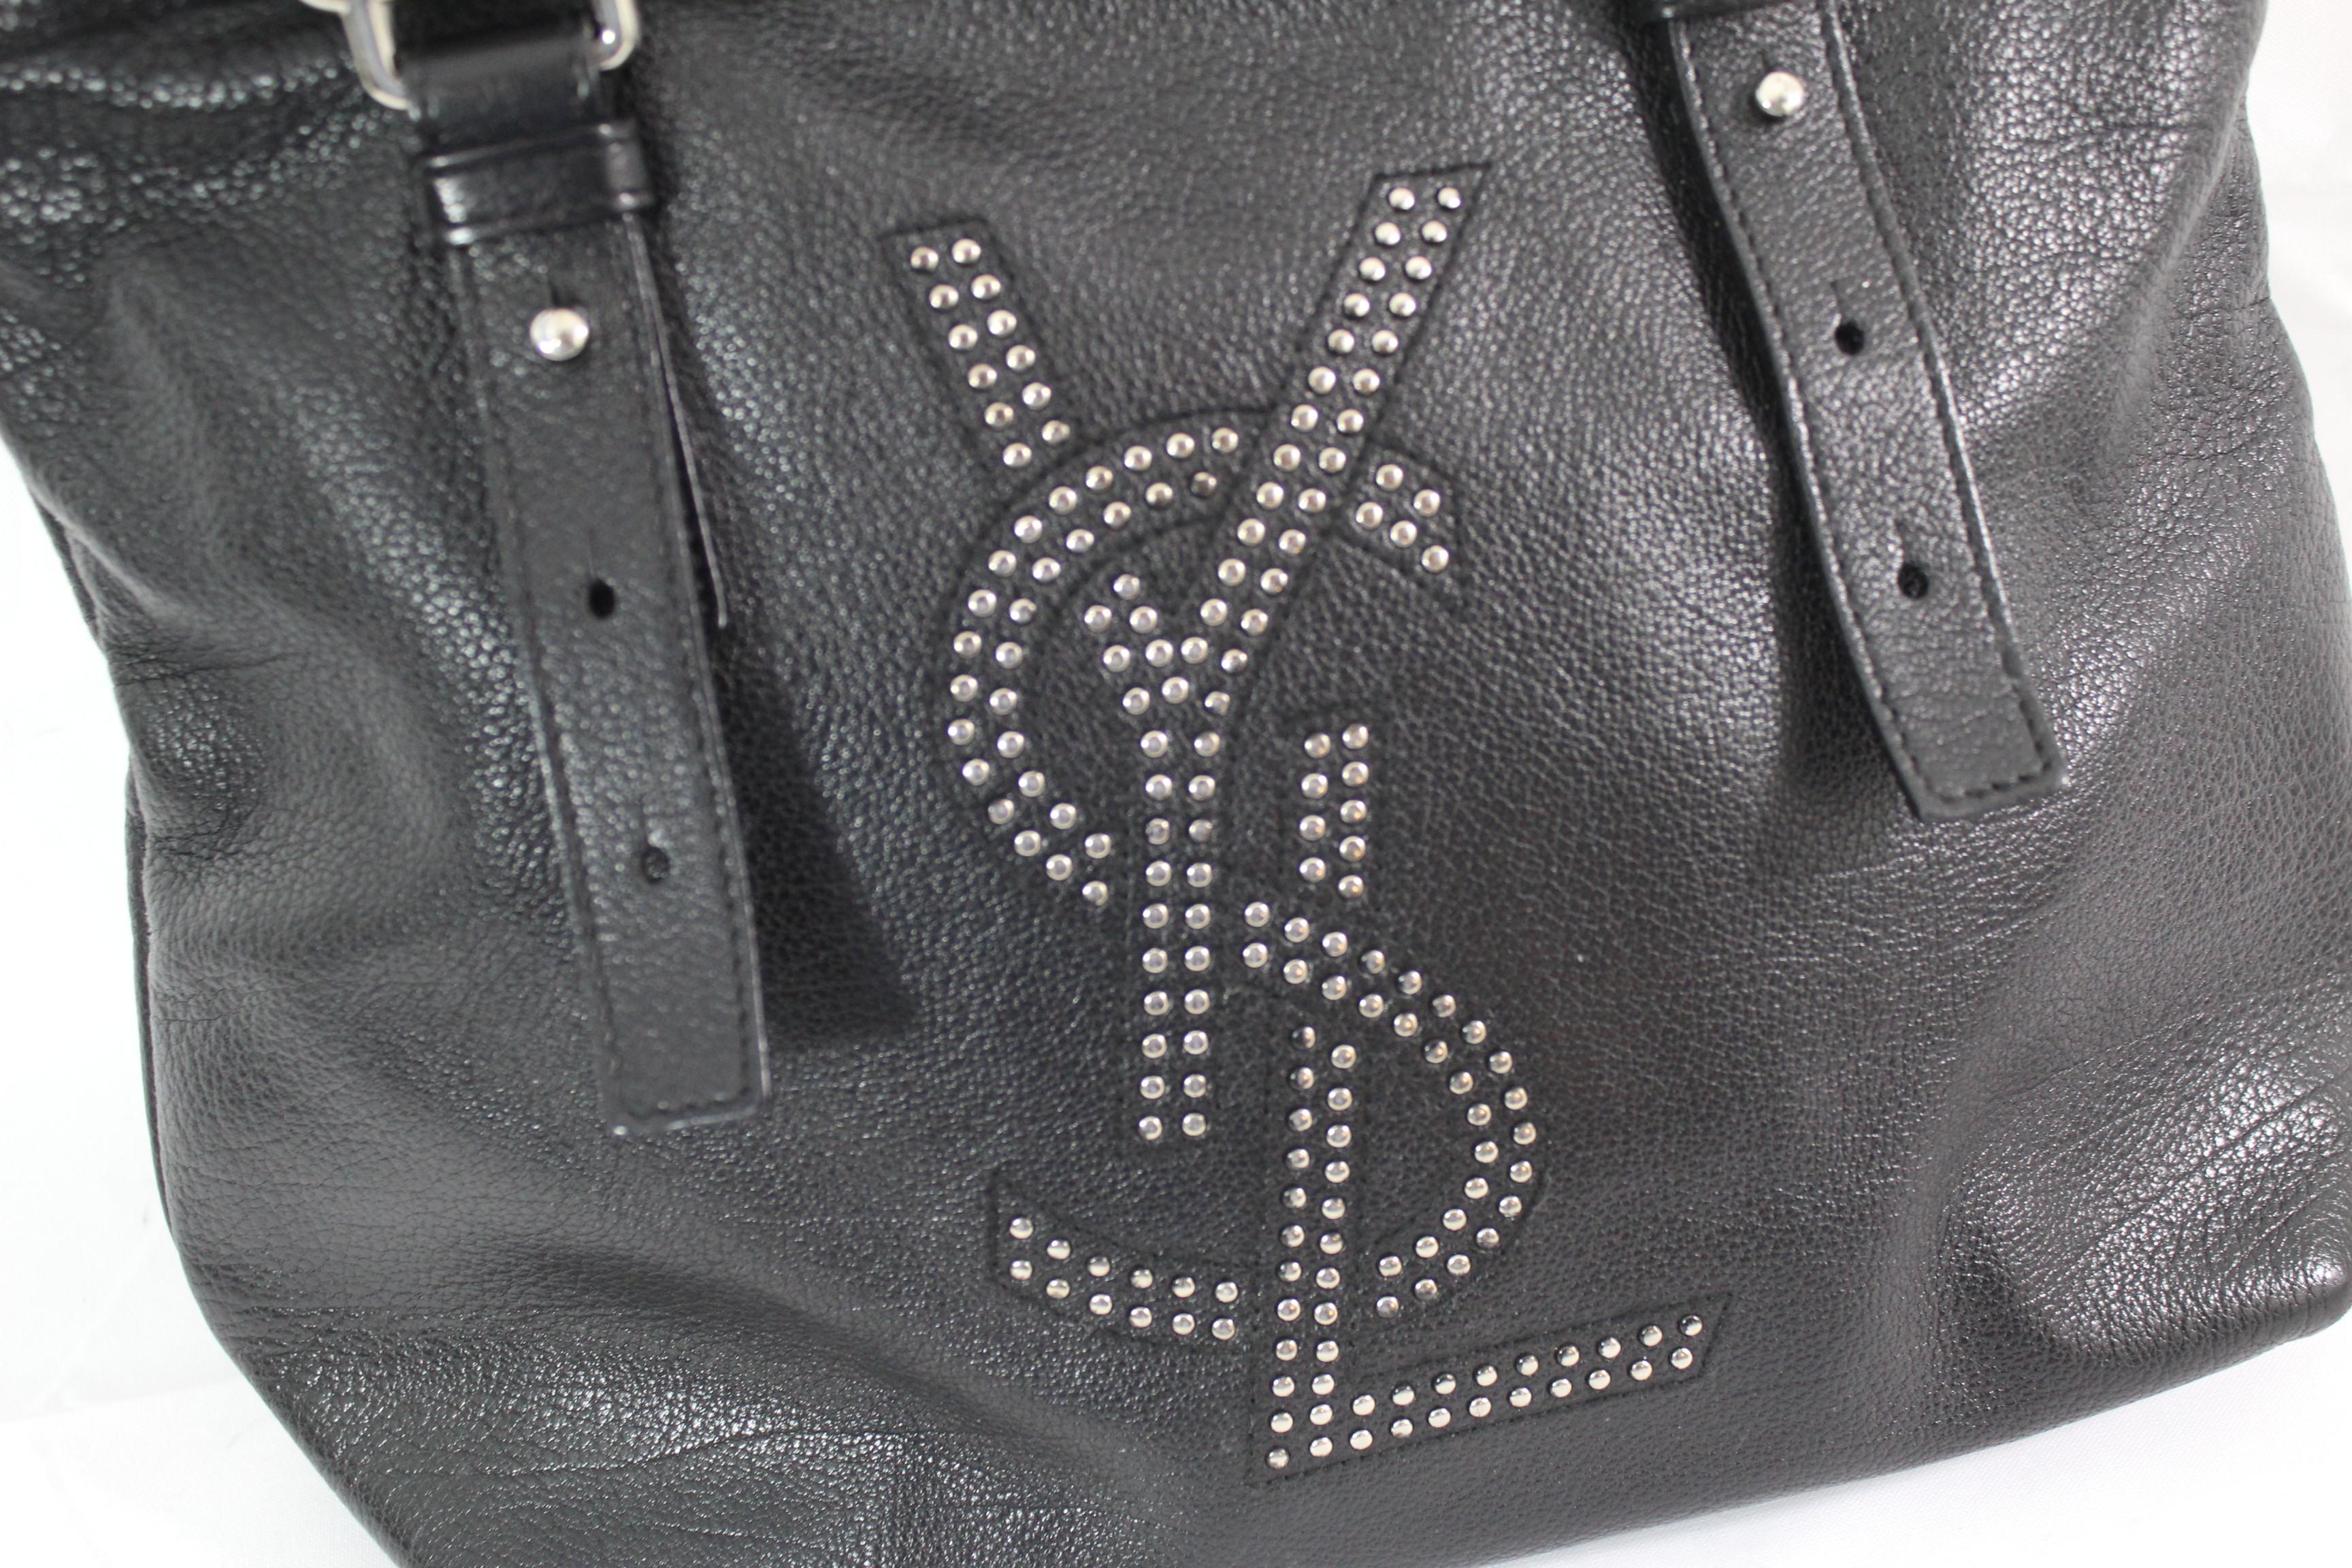 Nice Vintage YSl Studded Logo Yves Saint Laurent Bag.

Bag used but in good vintage condition, no major sign of use. Corner in good condition

Size 26*28 cm
